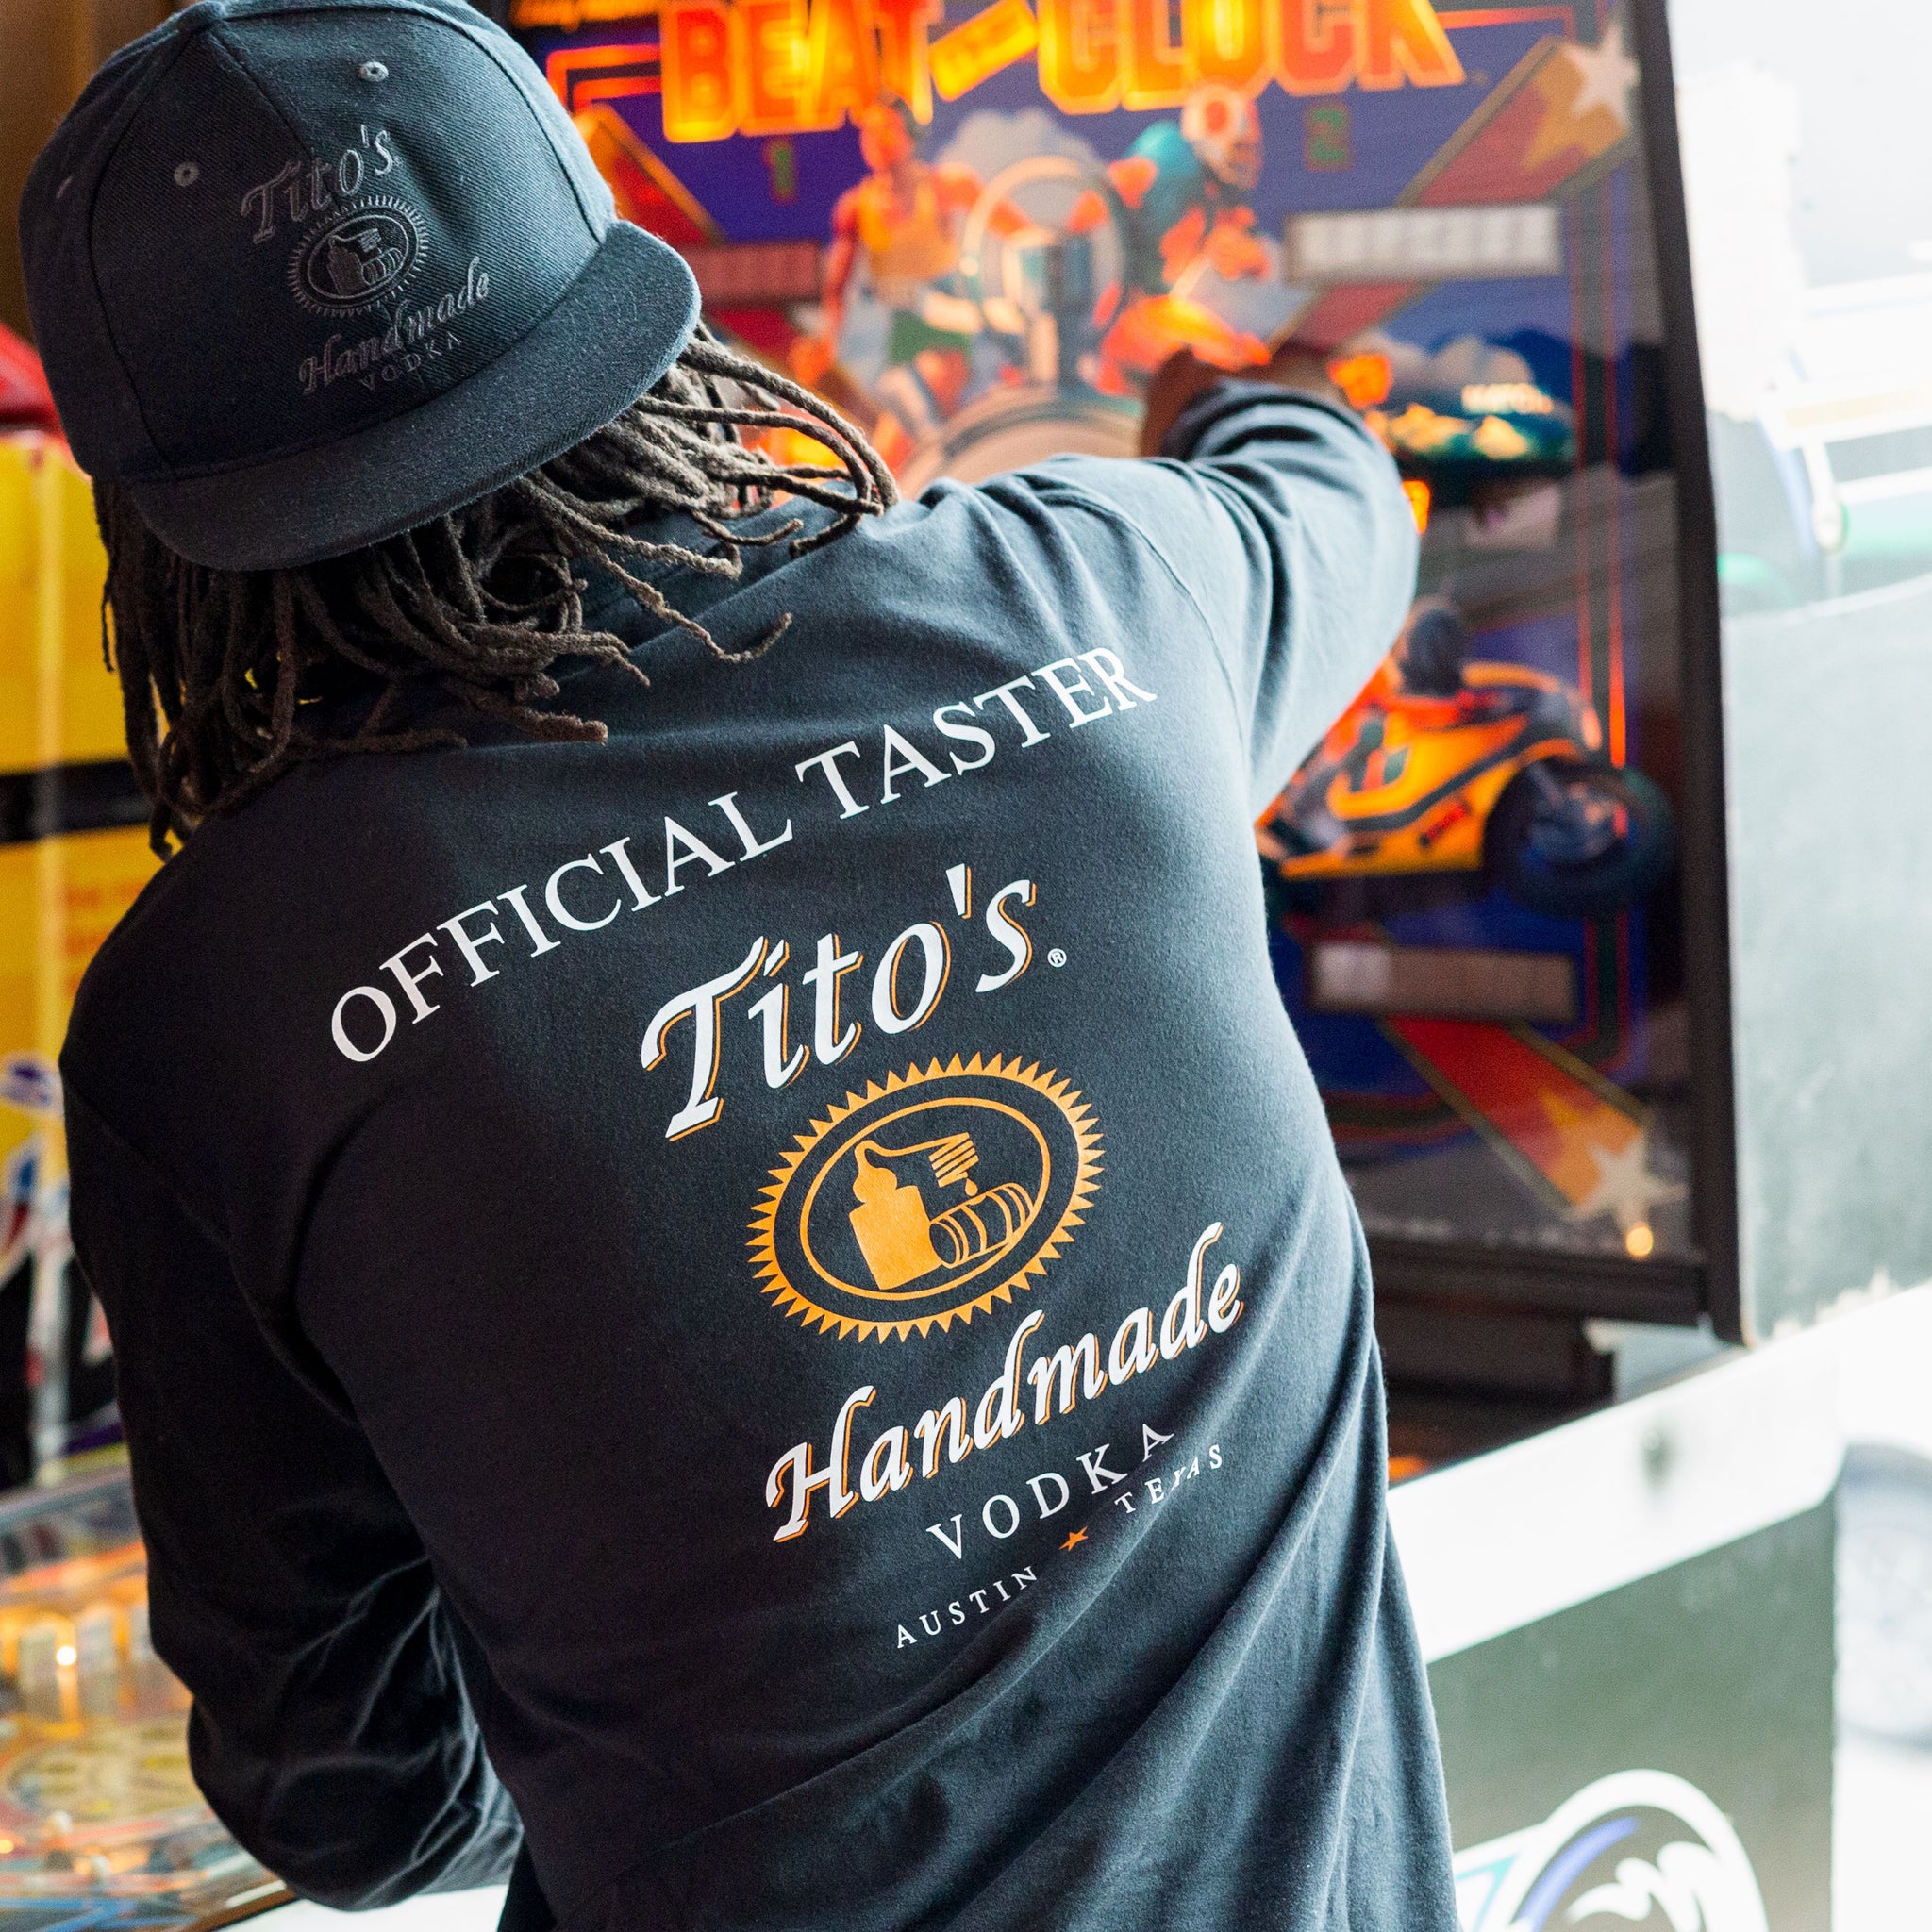 Man wearing black long-sleeved t-shirt with Official Tito's Taster mark